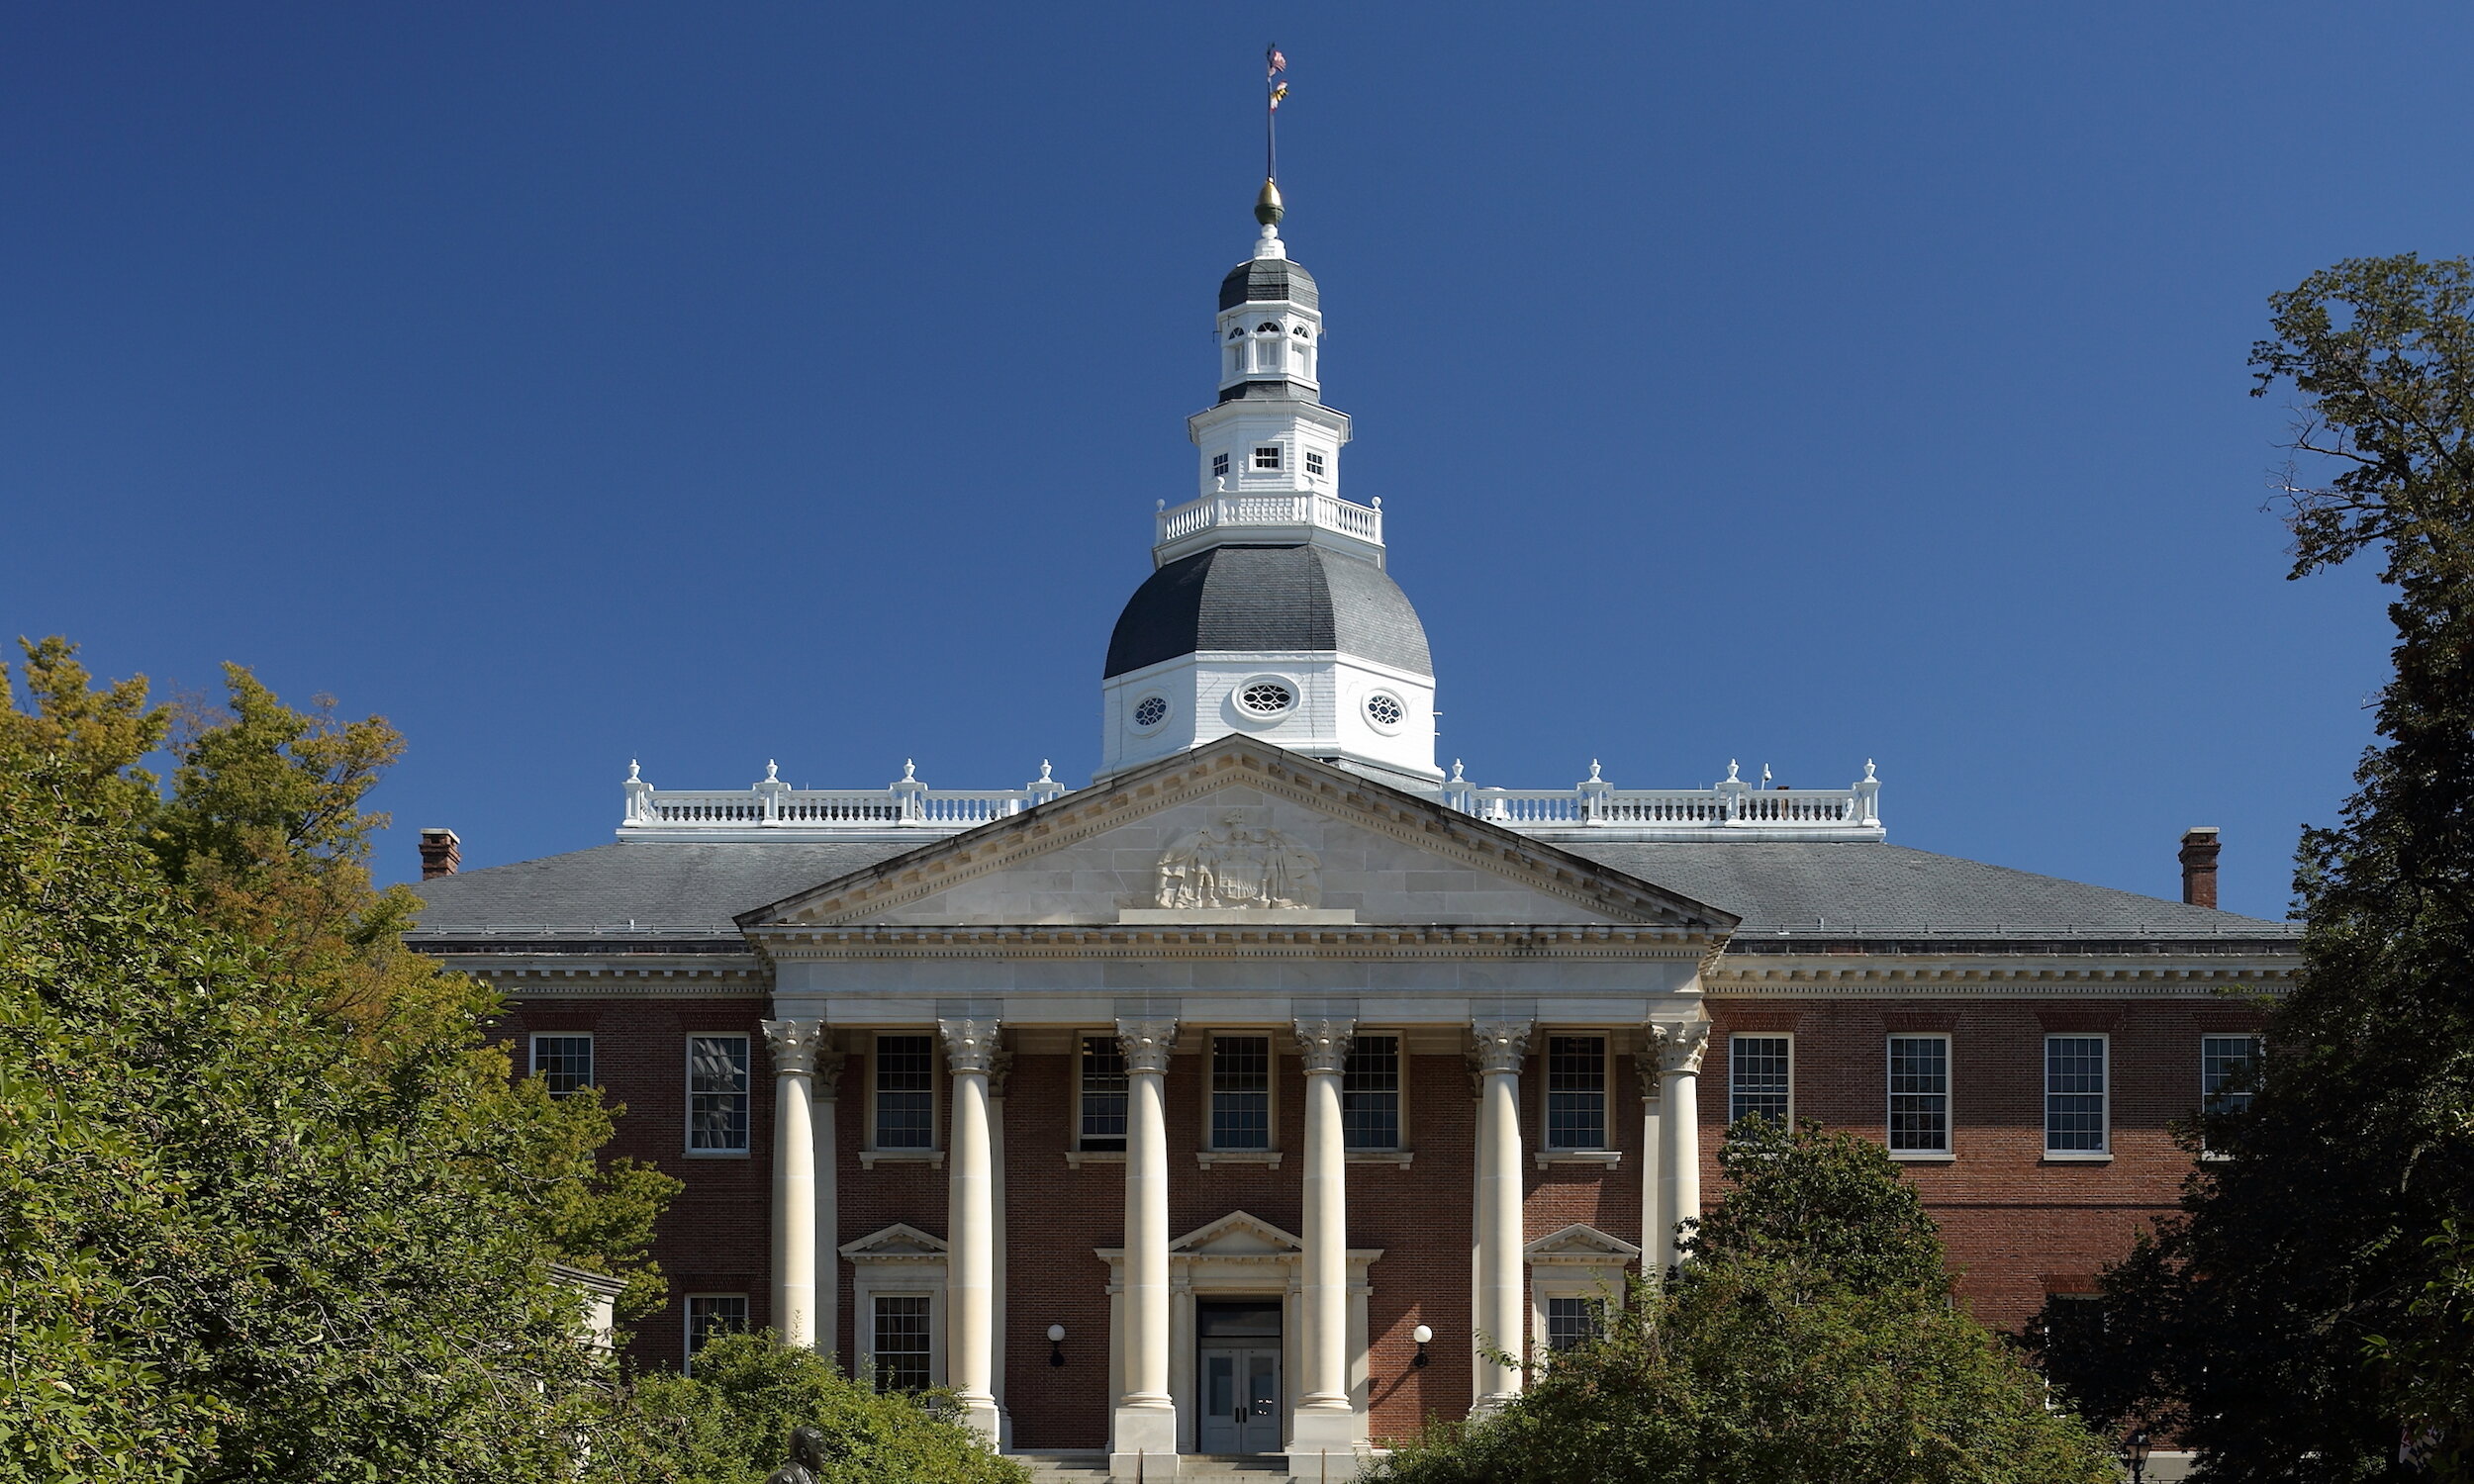 Maryland Cannabis News in 2019 Revolved Around Racial Equity